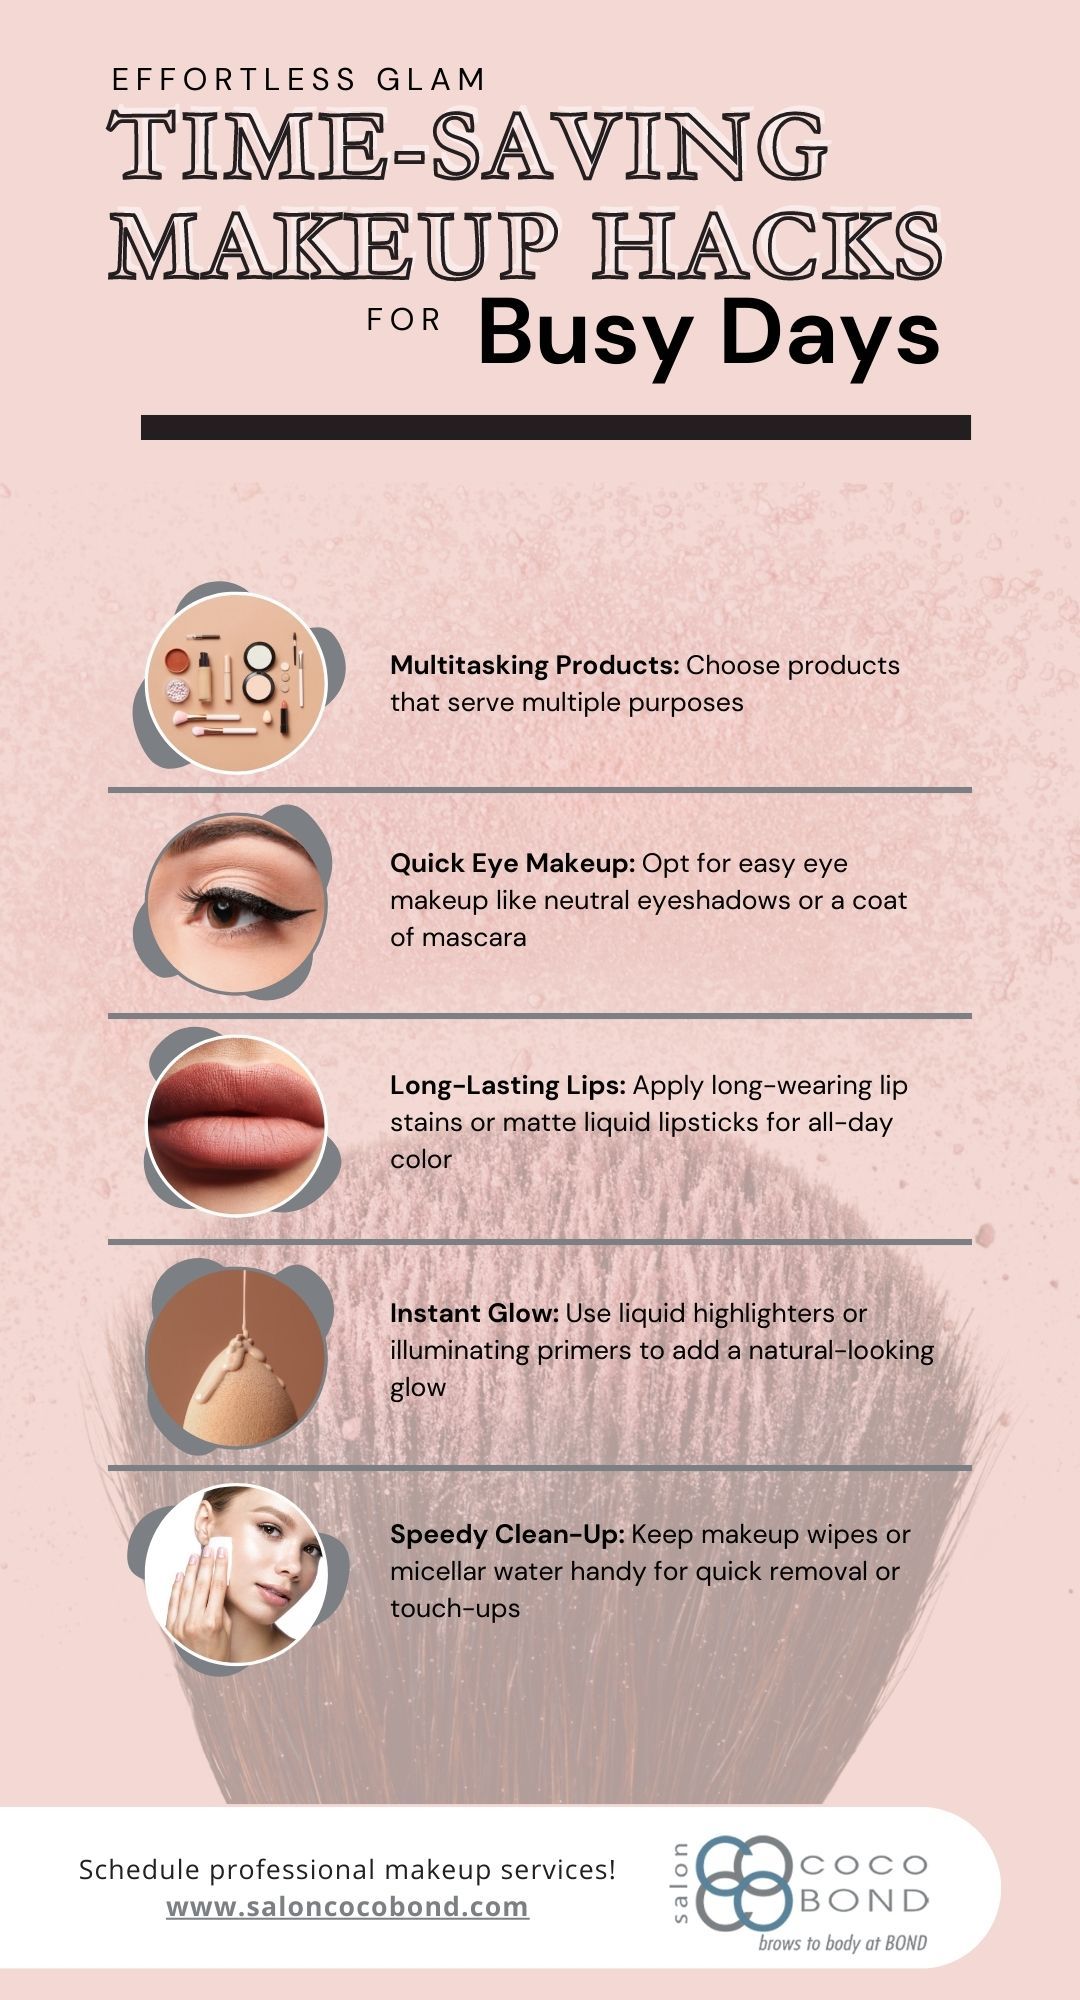 M35192 - Infographic - Effortless Glam Time-Saving Makeup Hacks for Busy Days.jpg